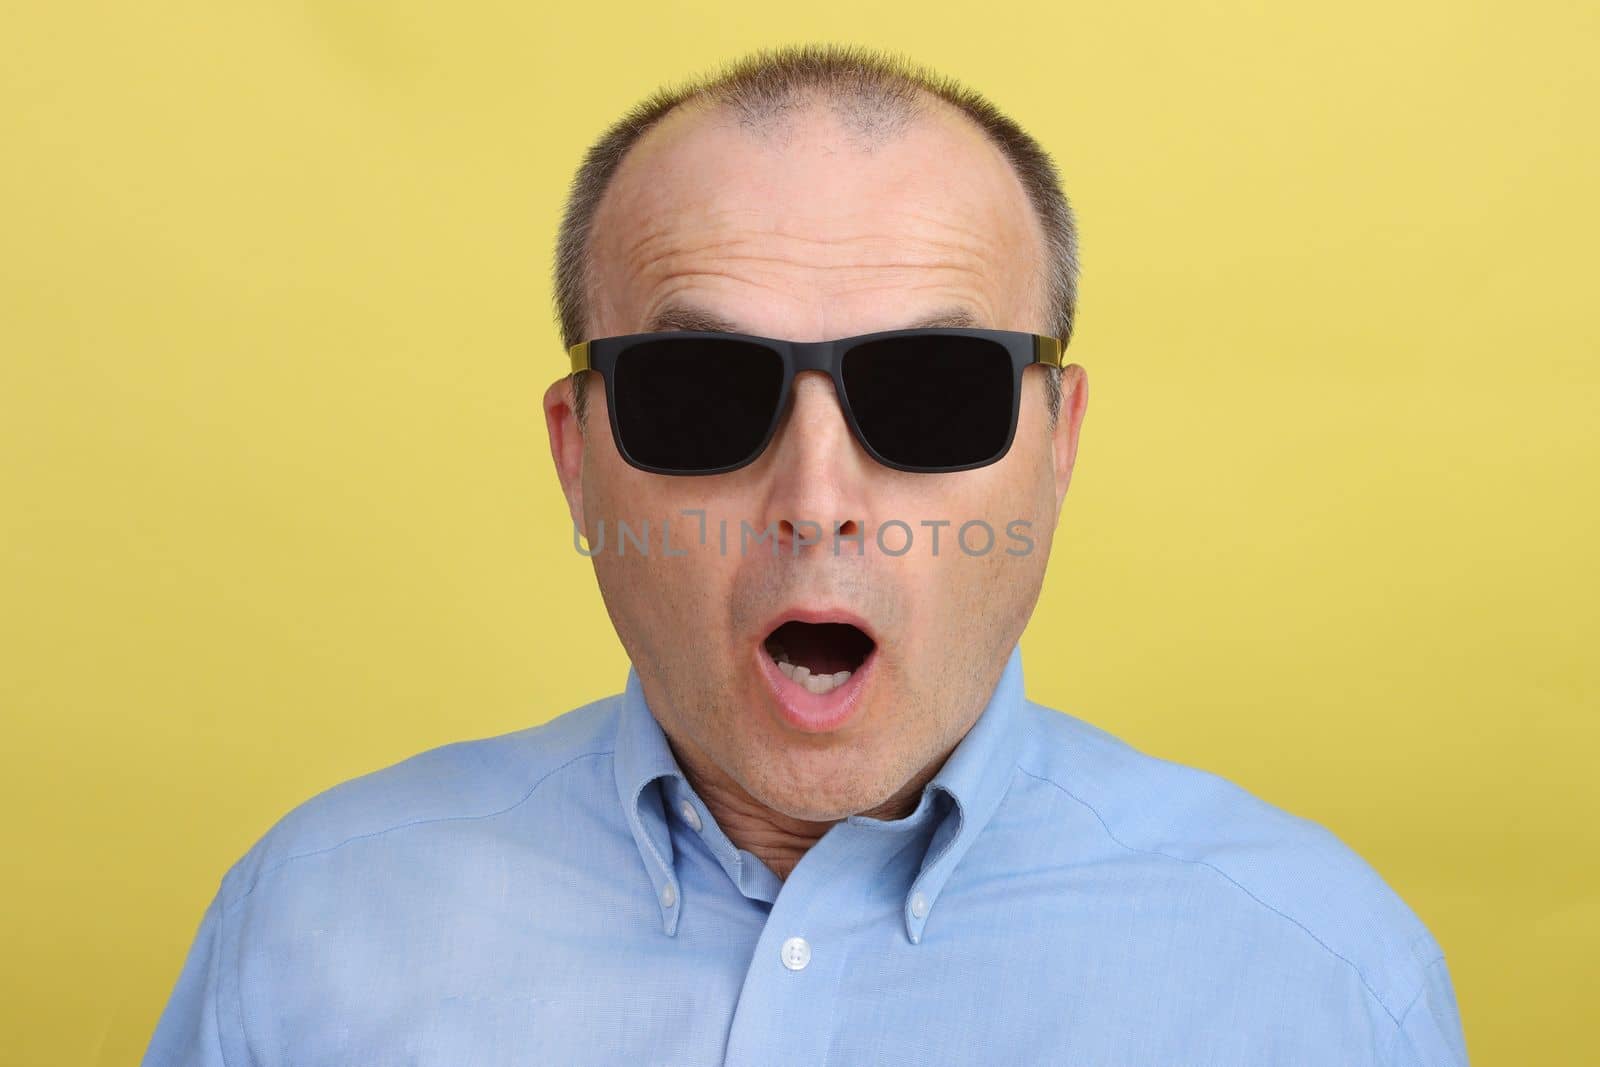 Handsome man in a blue shirt and black glasses in after 40 years on a yellow background.